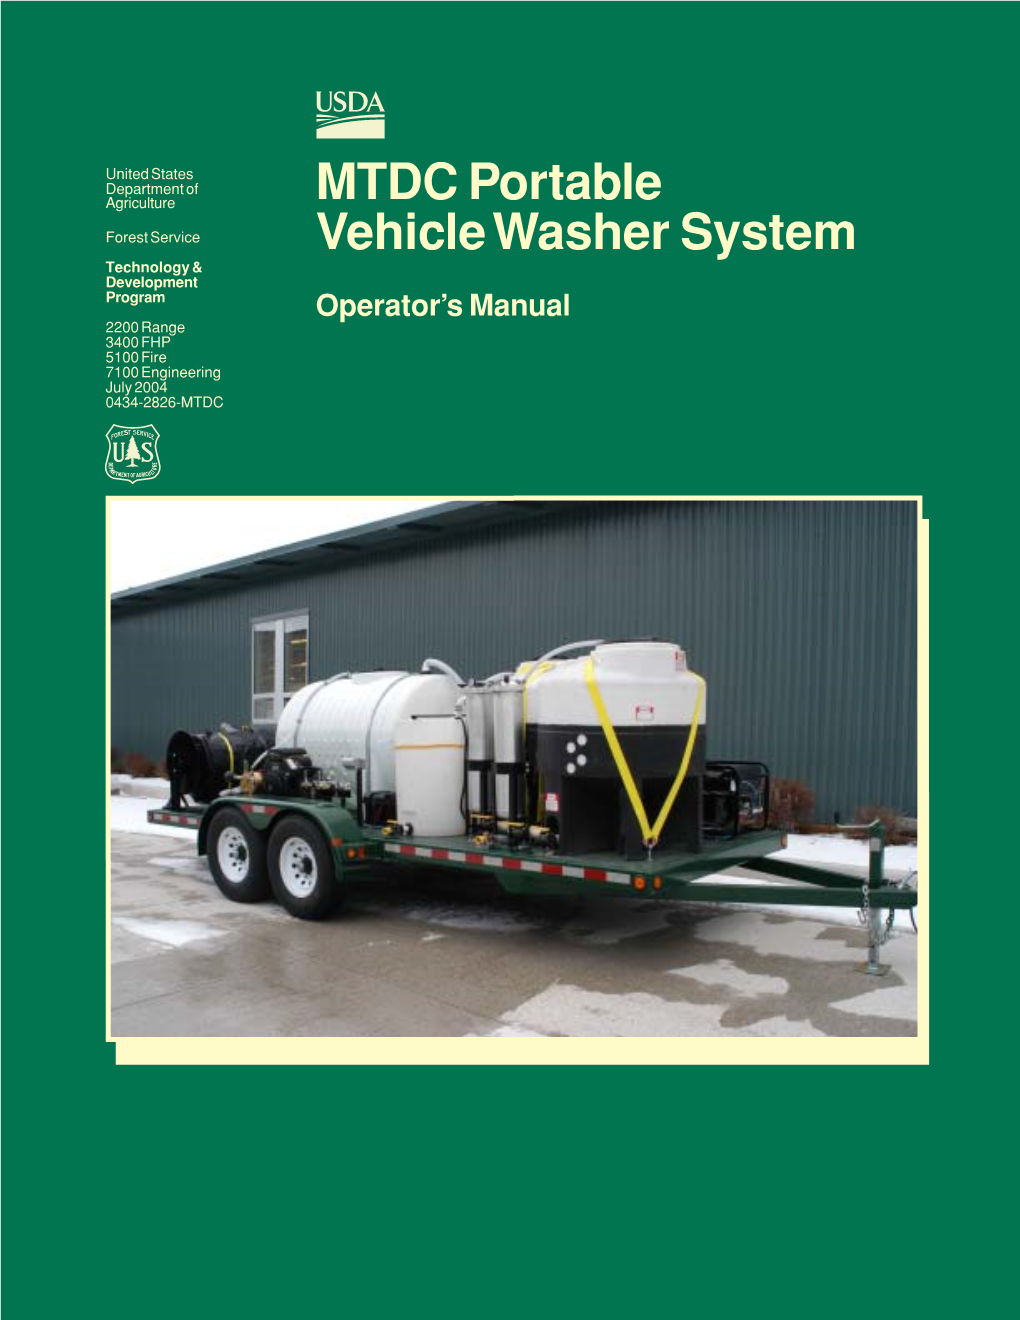 MTDC Portable Vehicle Washer System